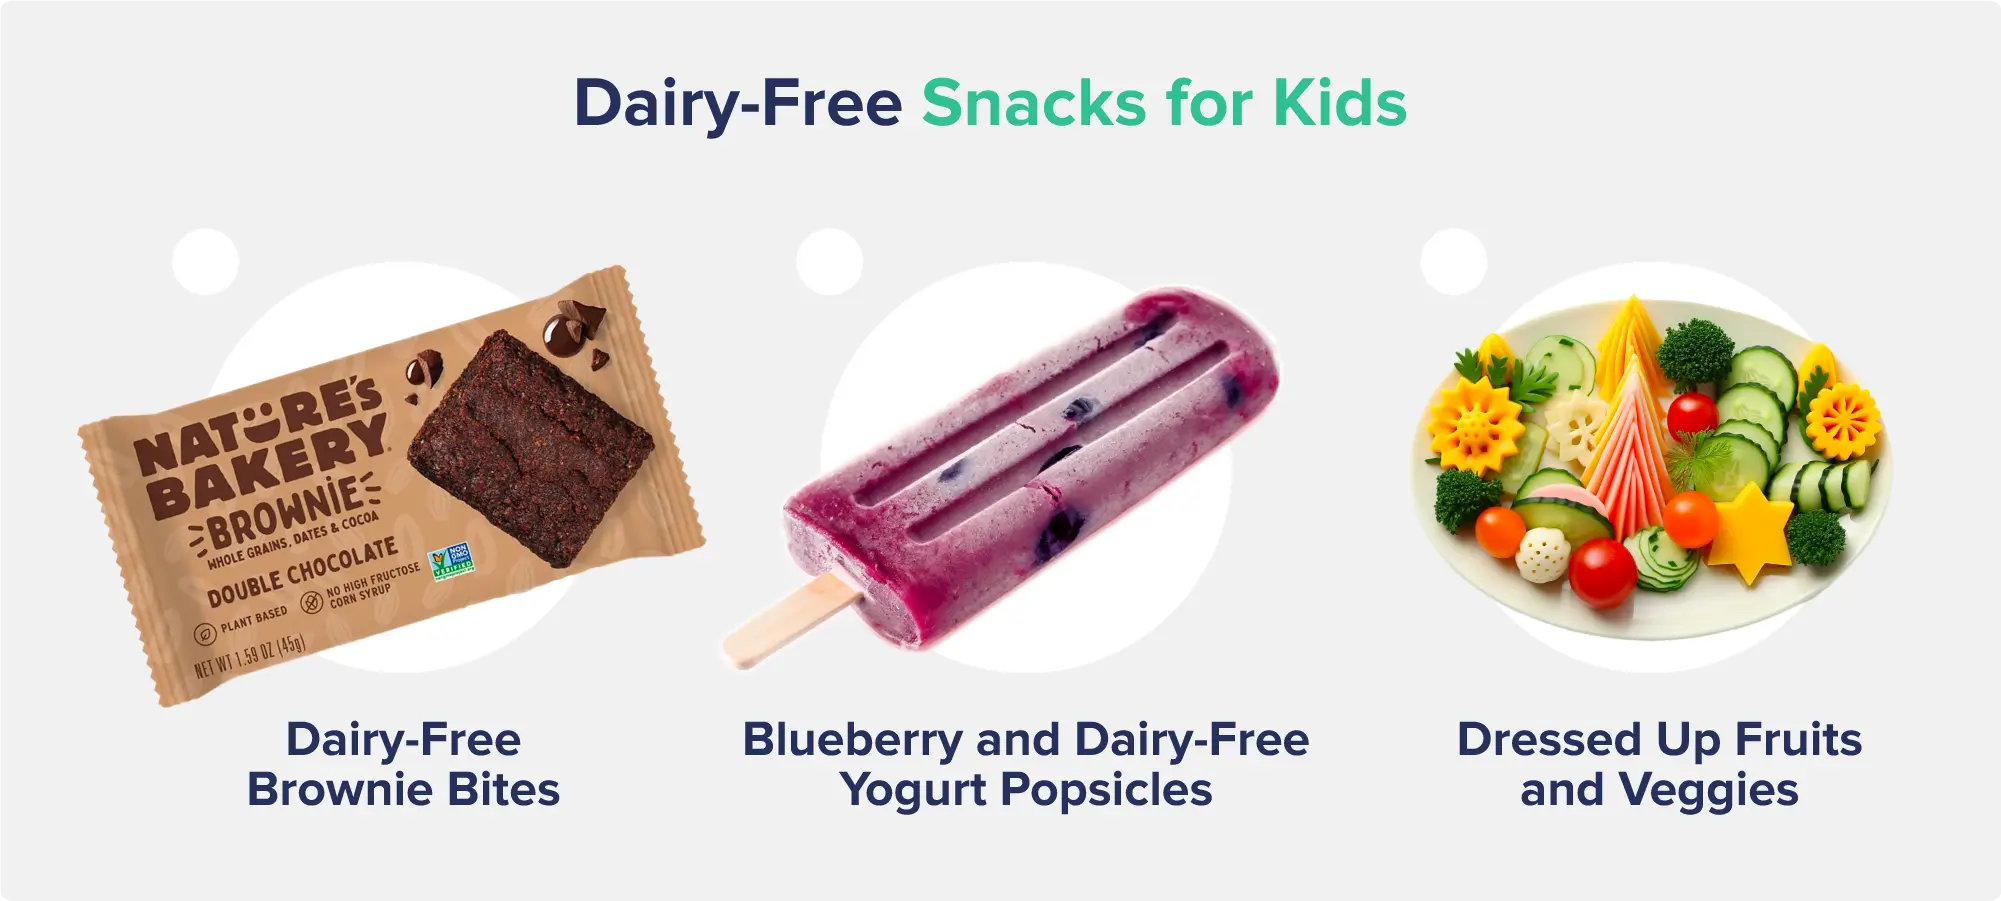 A graphic entitled "Dairy-Free Snacks for Kids" depicting labeled images of a package of Nature's Bakery Dairy-Free Brownie Bites, a blueberry and dairy-free yogurt popsicle, and a fruit and vegetable plate.